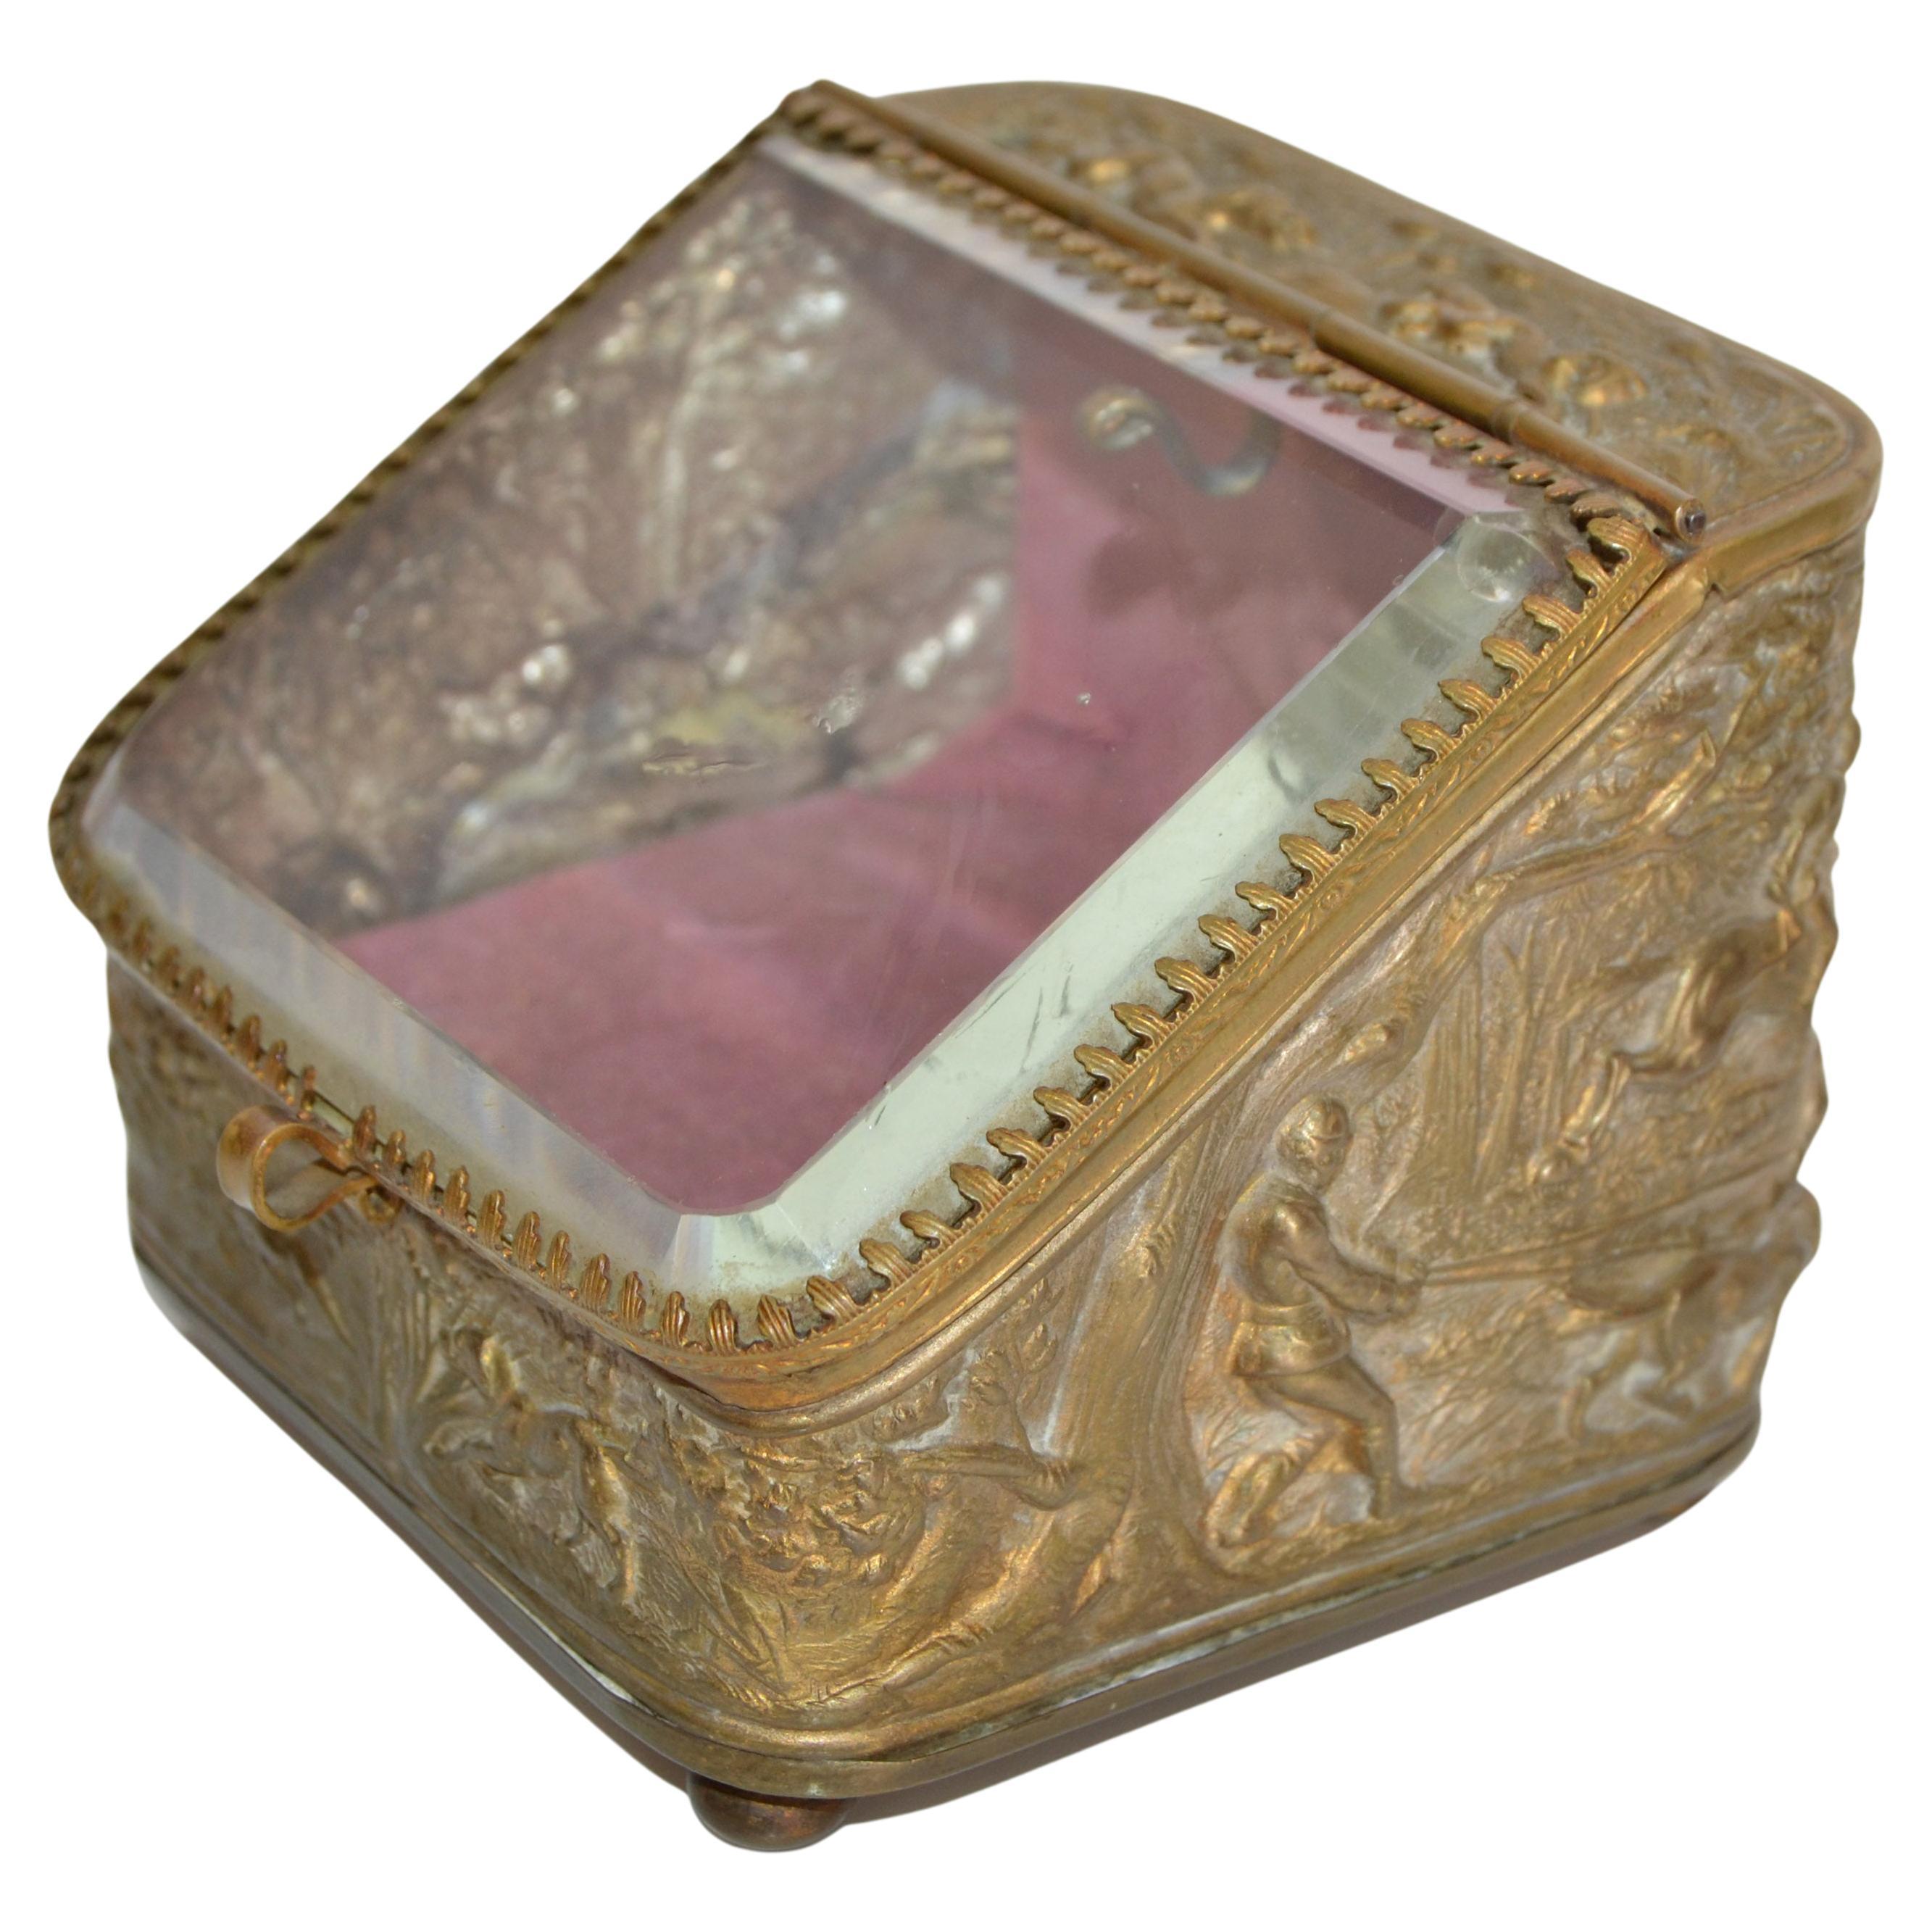 Napoleon III Era Pocket Watch Display Casket, Box Hunt Theme Dogs, Boar, Hounds and Men riding Horses in Action.
Jewelry Module, Box having a beveled Glass Display Lid with embossed edges. 
Art Nouveau Style Ring Container for Your Dresser or